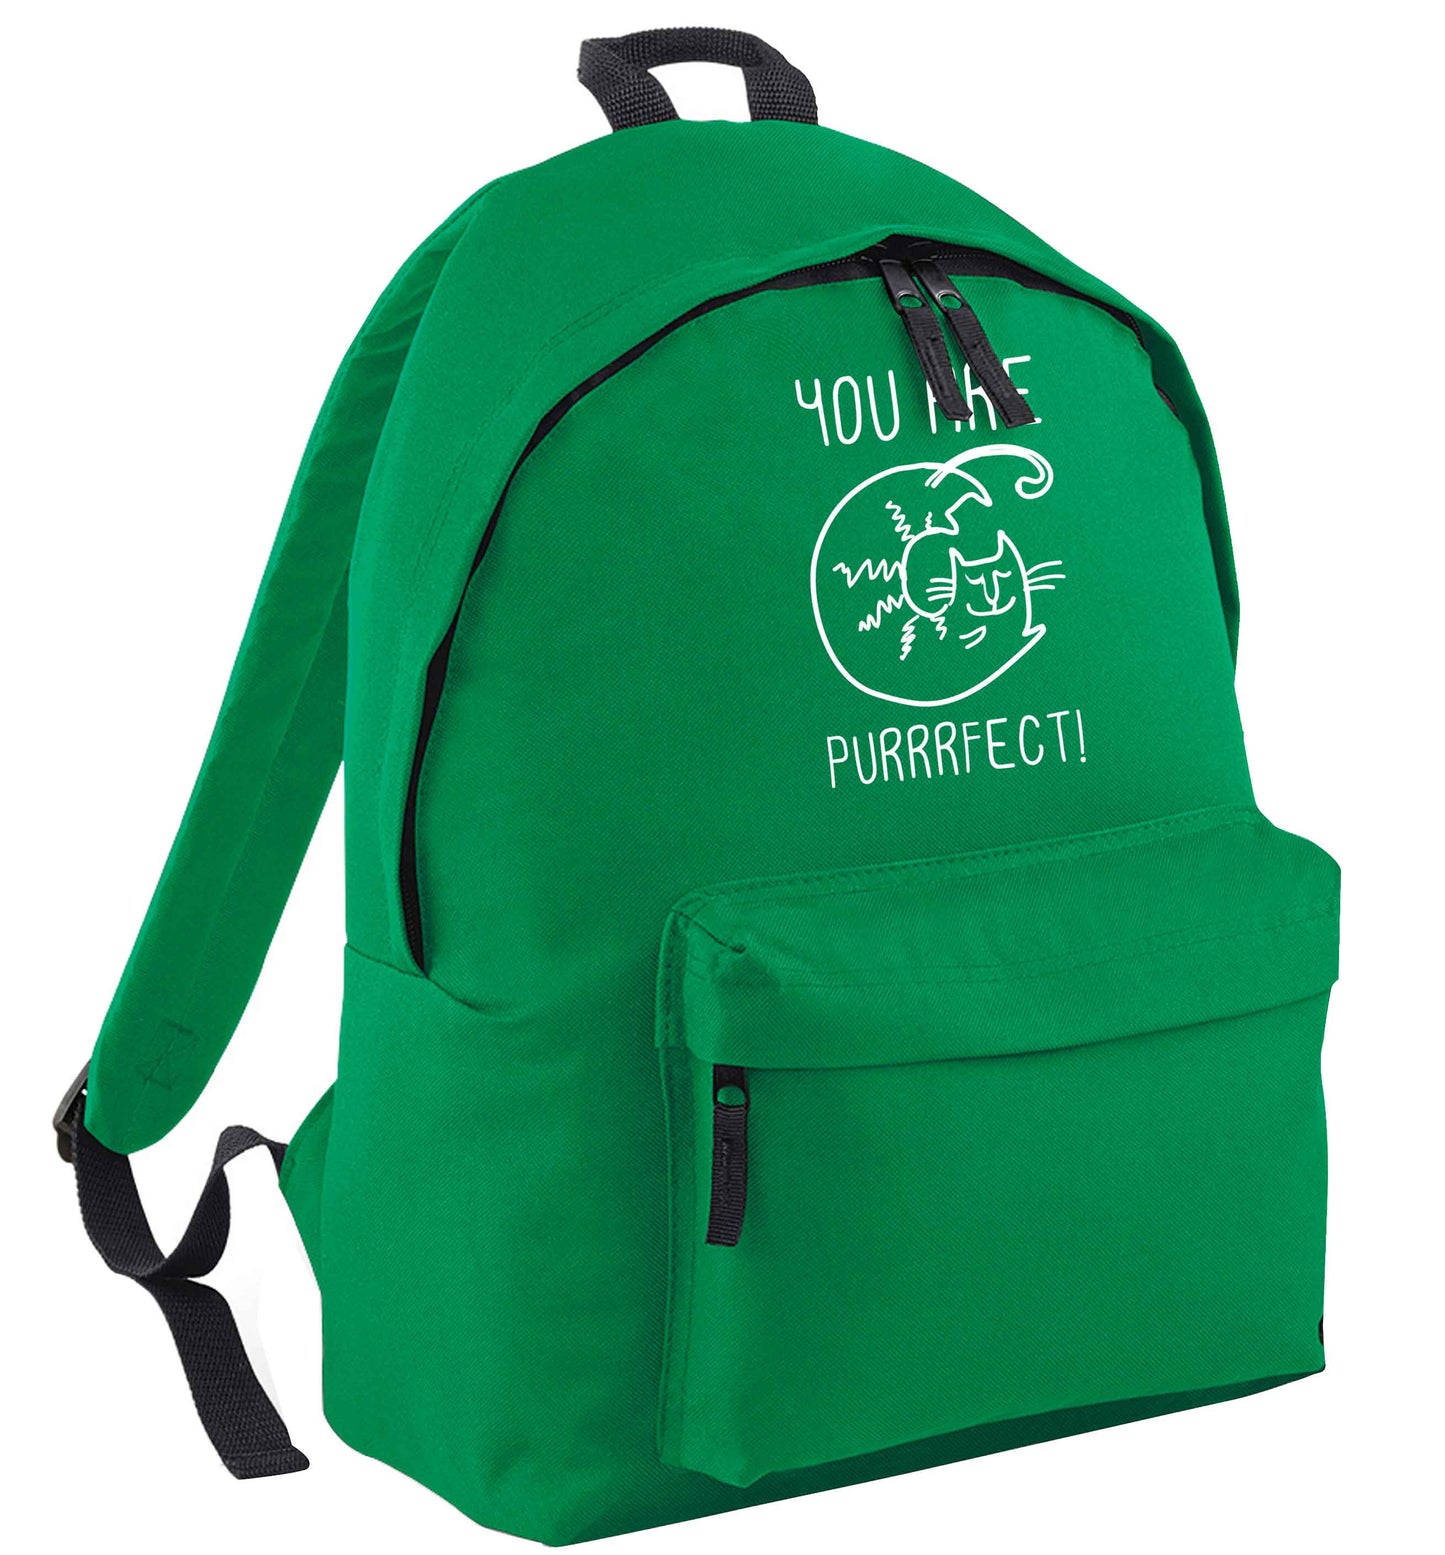 You are purrfect green adults backpack